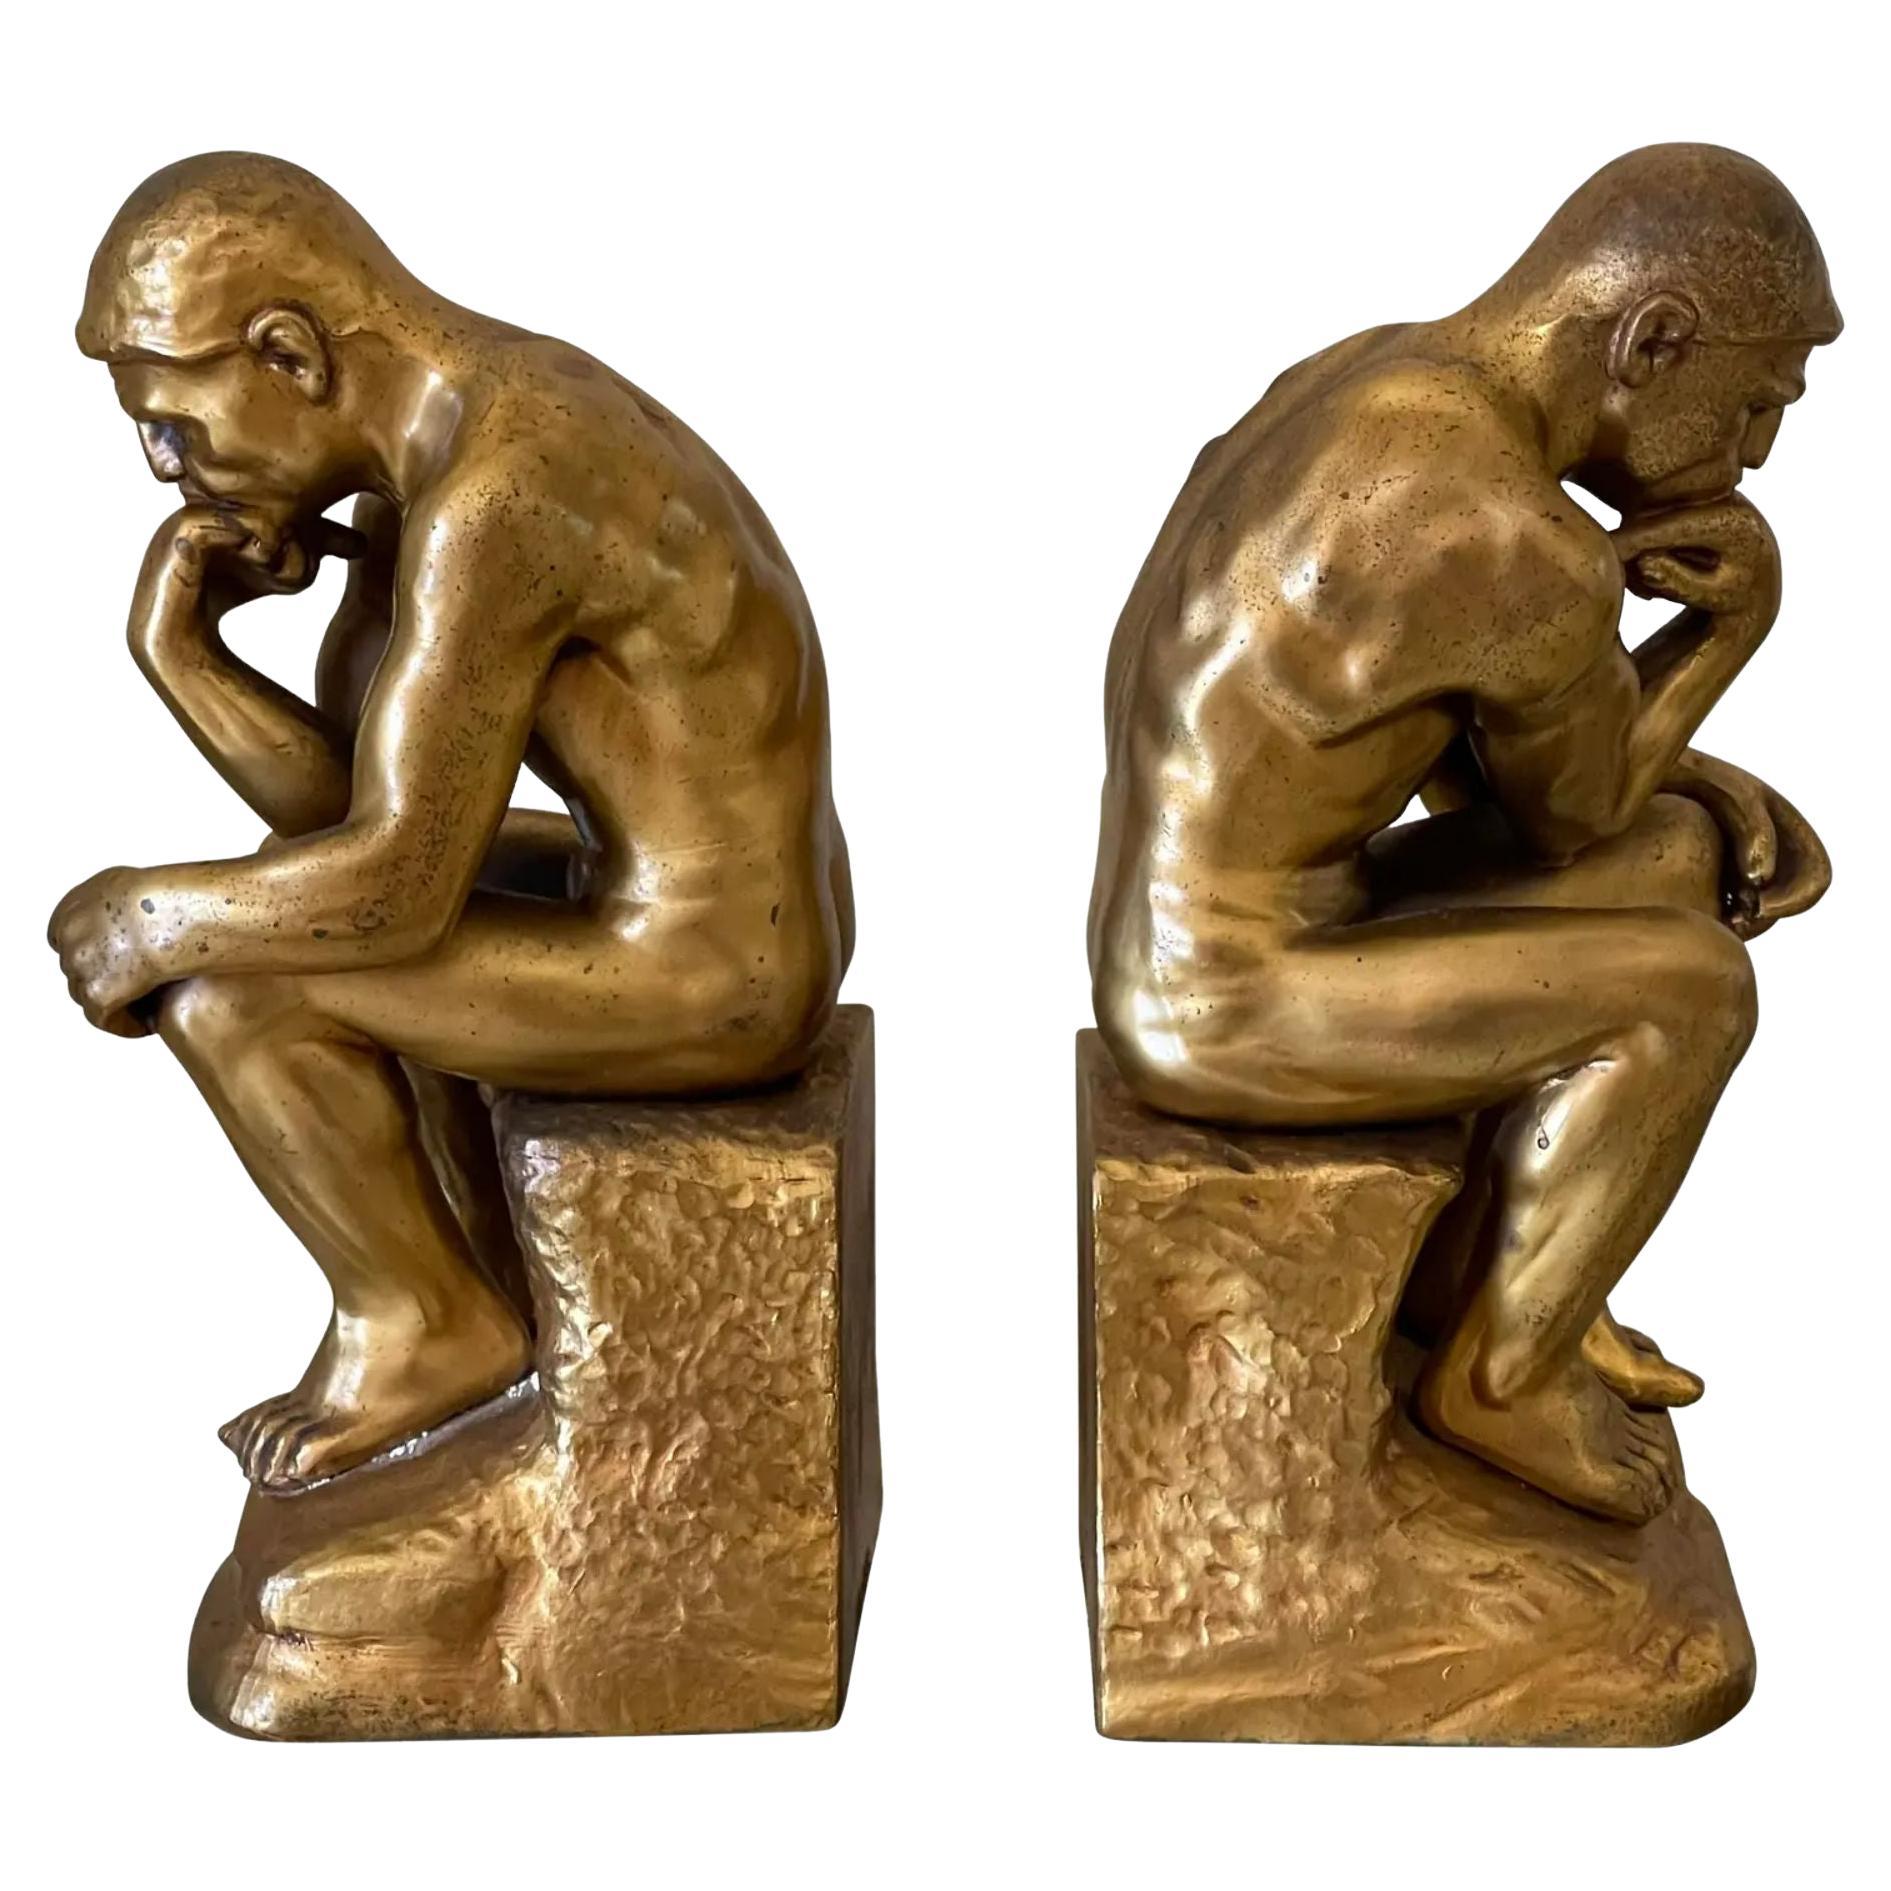 Pair of Antique Male Nude Figural Bookends - the Thinker, 1910s